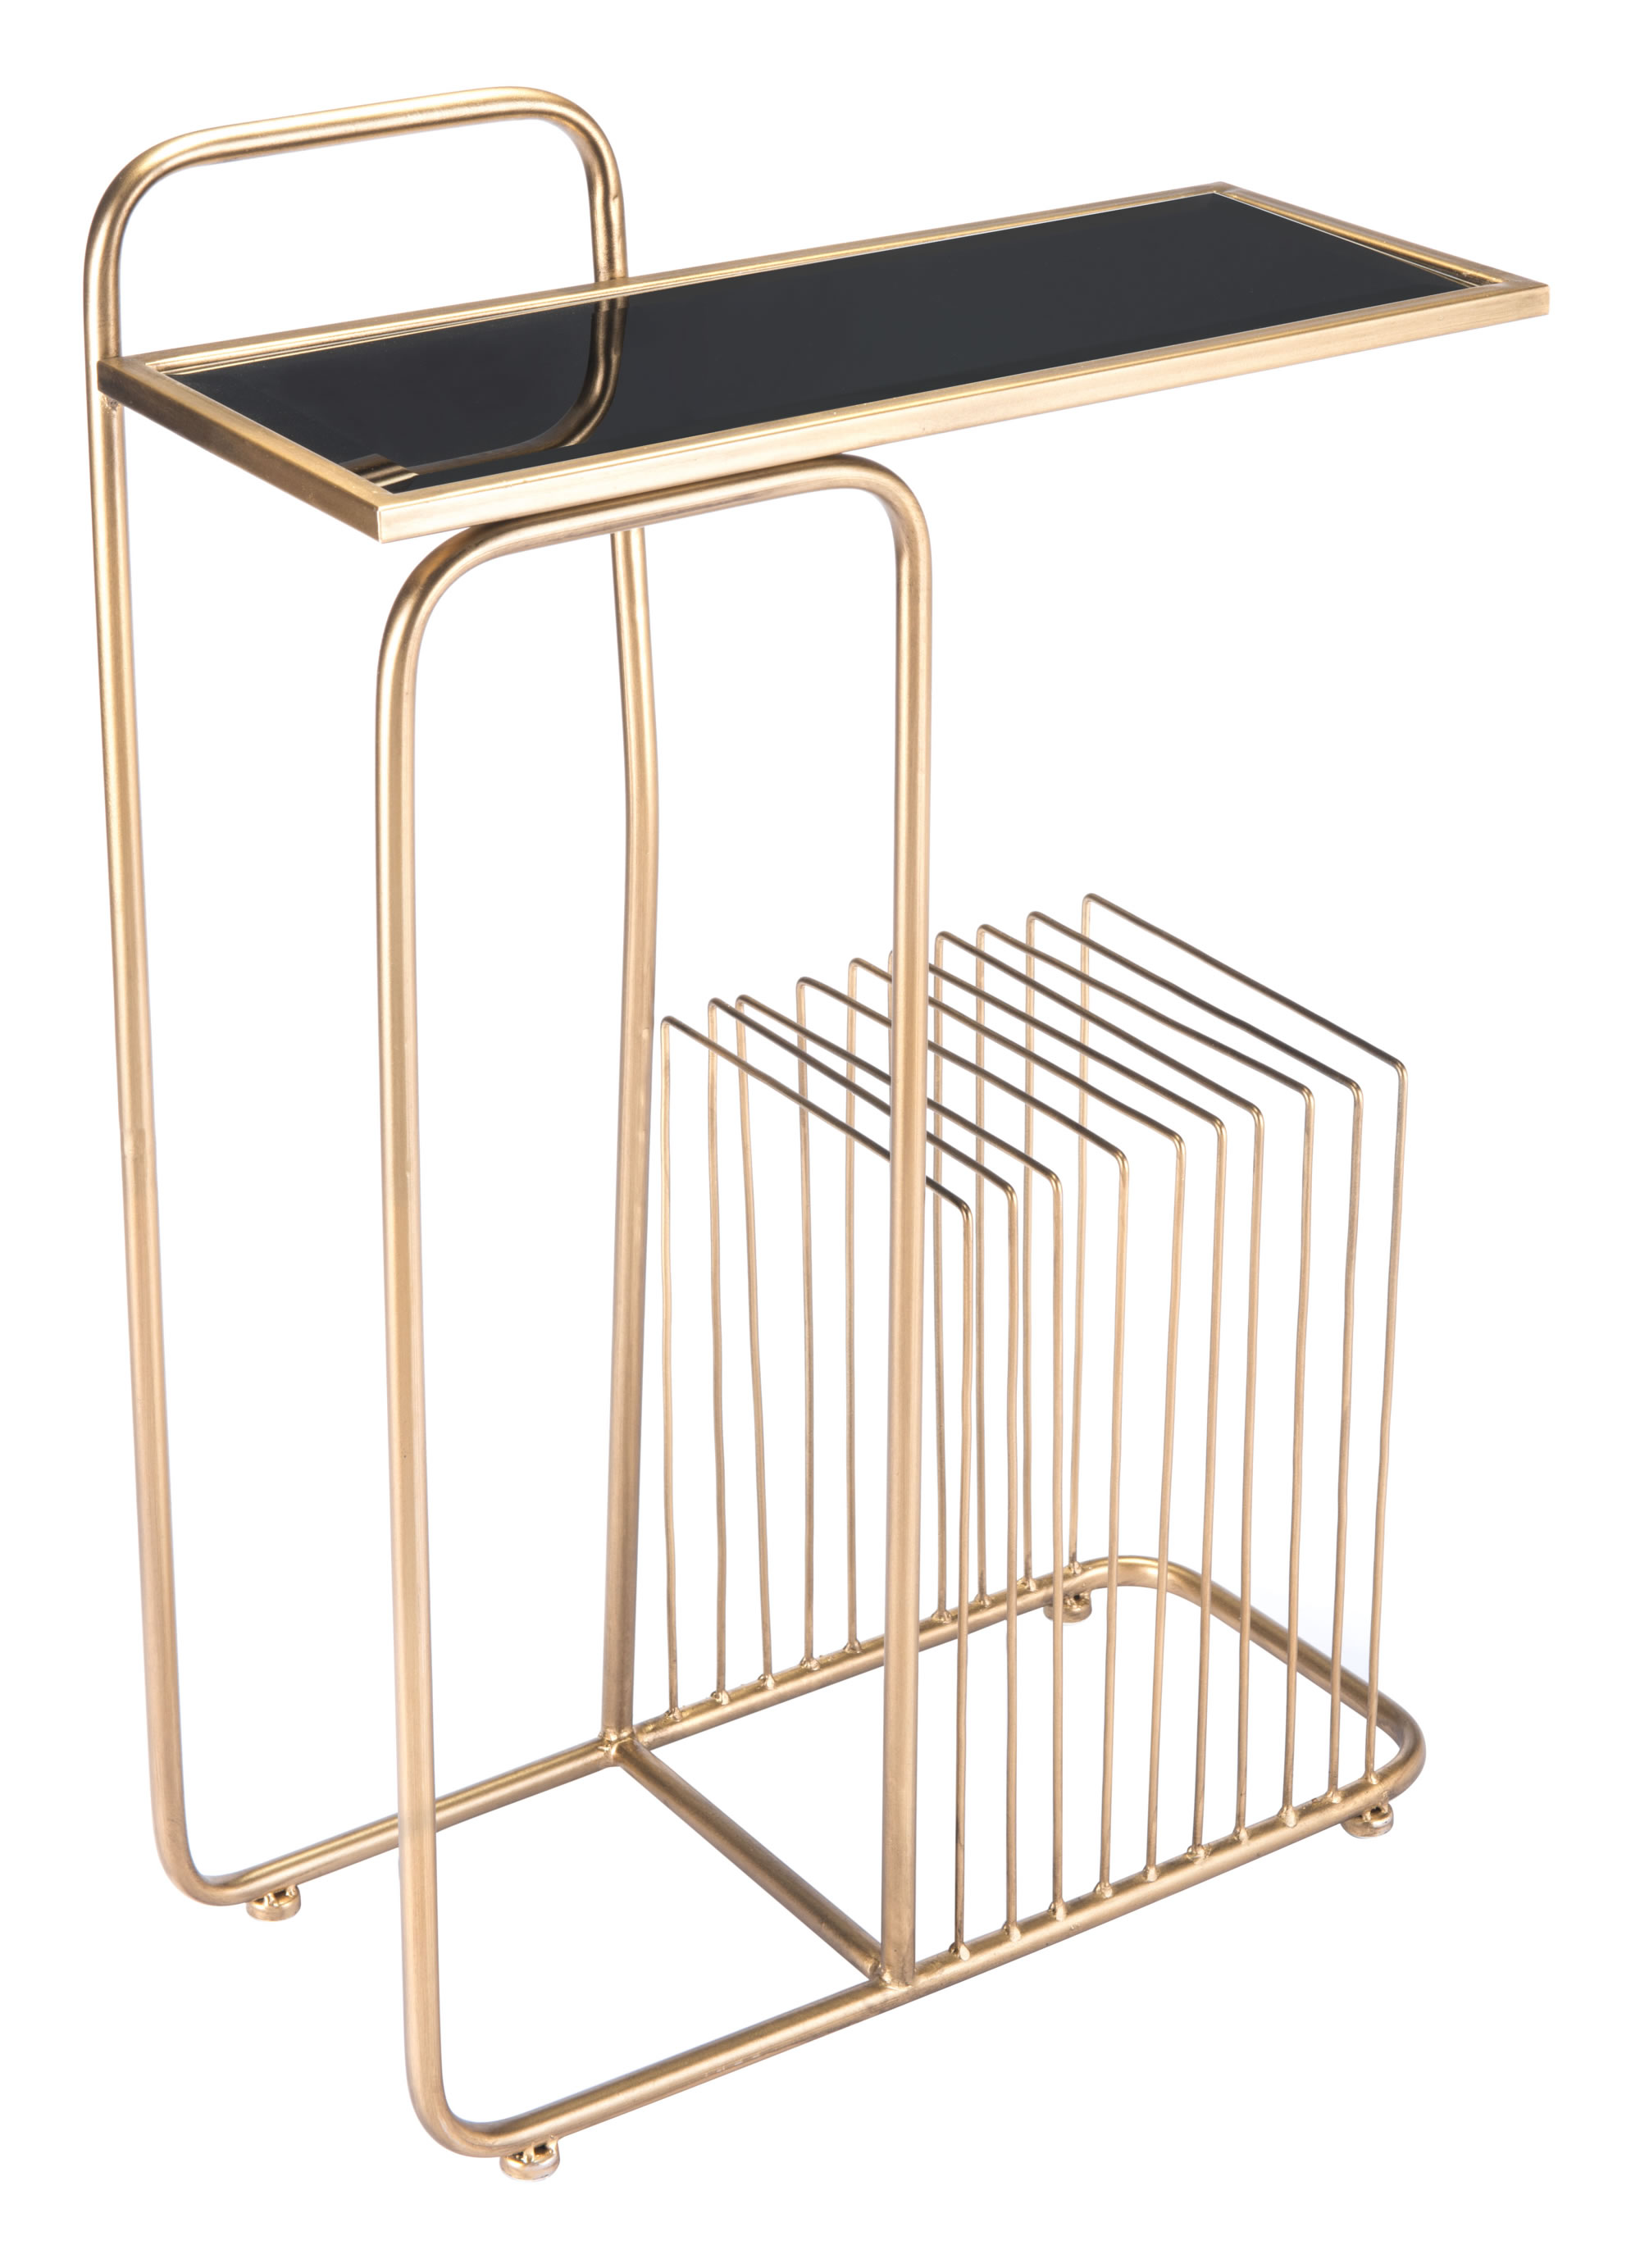 19.7" x 8.5" x 28.3" Gold, Steel, Mirror, Side Table